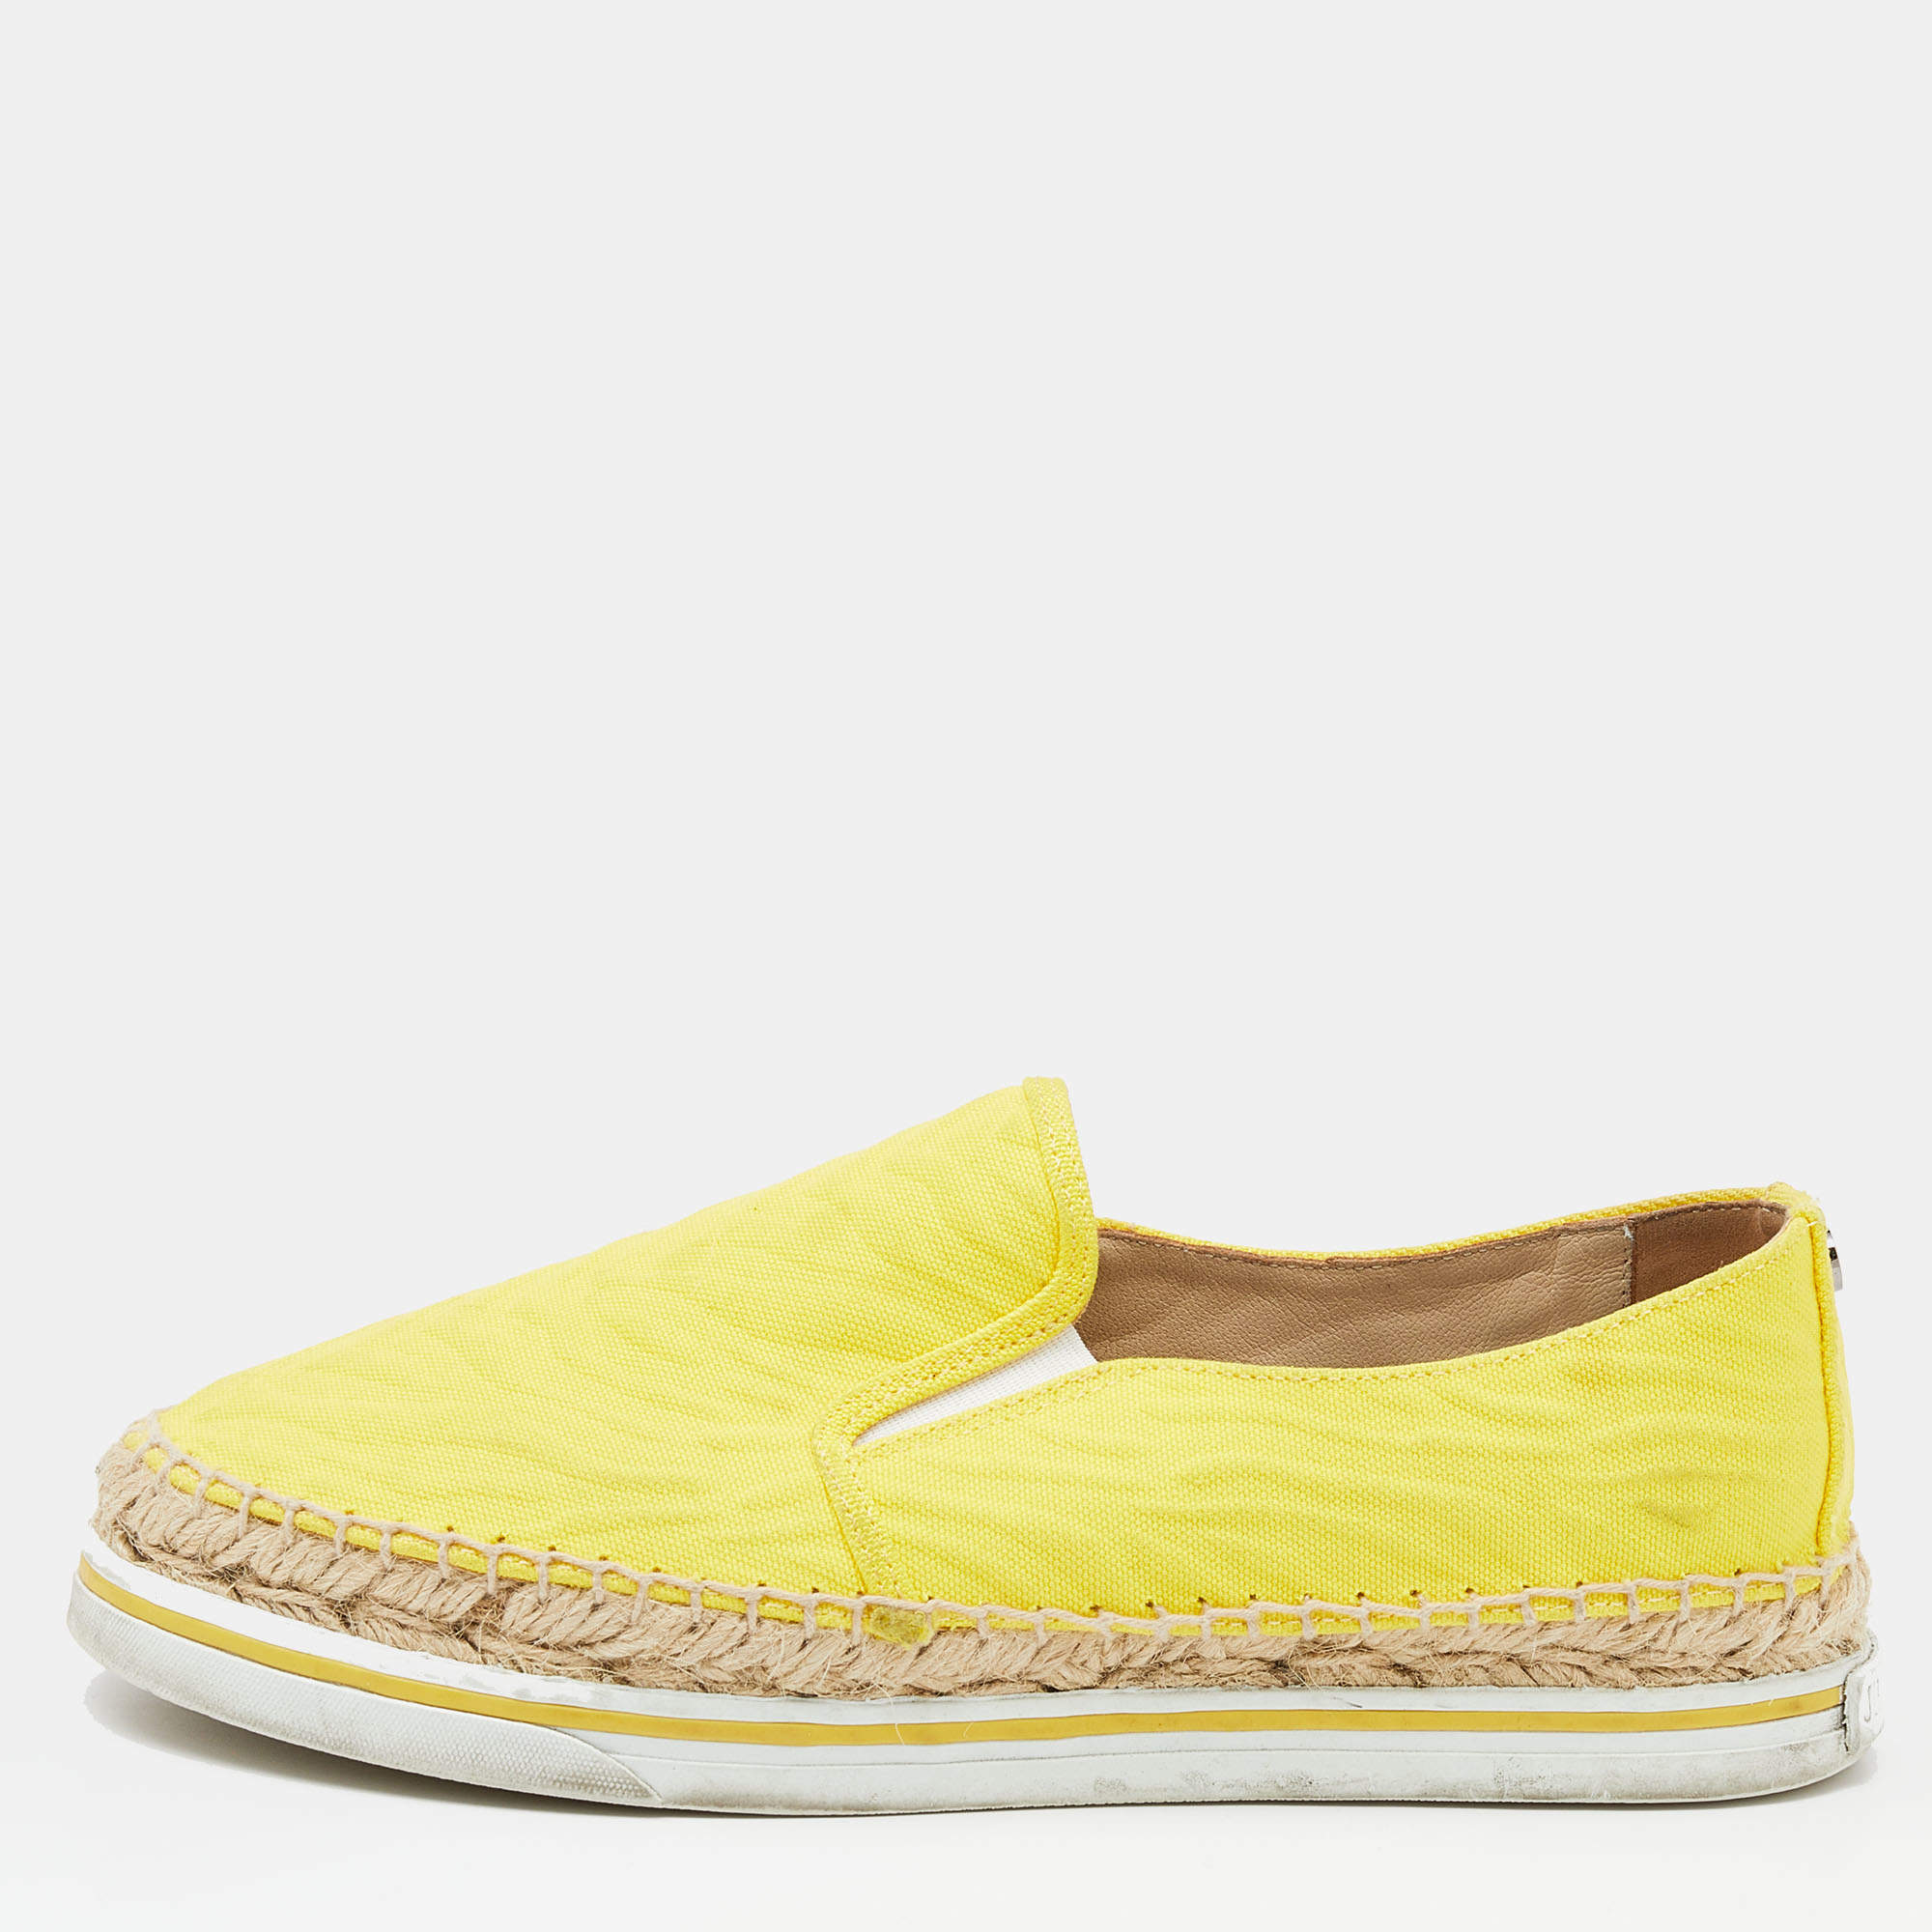 Jimmy Choo Yellow Canvas Dawn Slip On Espadrille Sneakers Size 35.5 ...